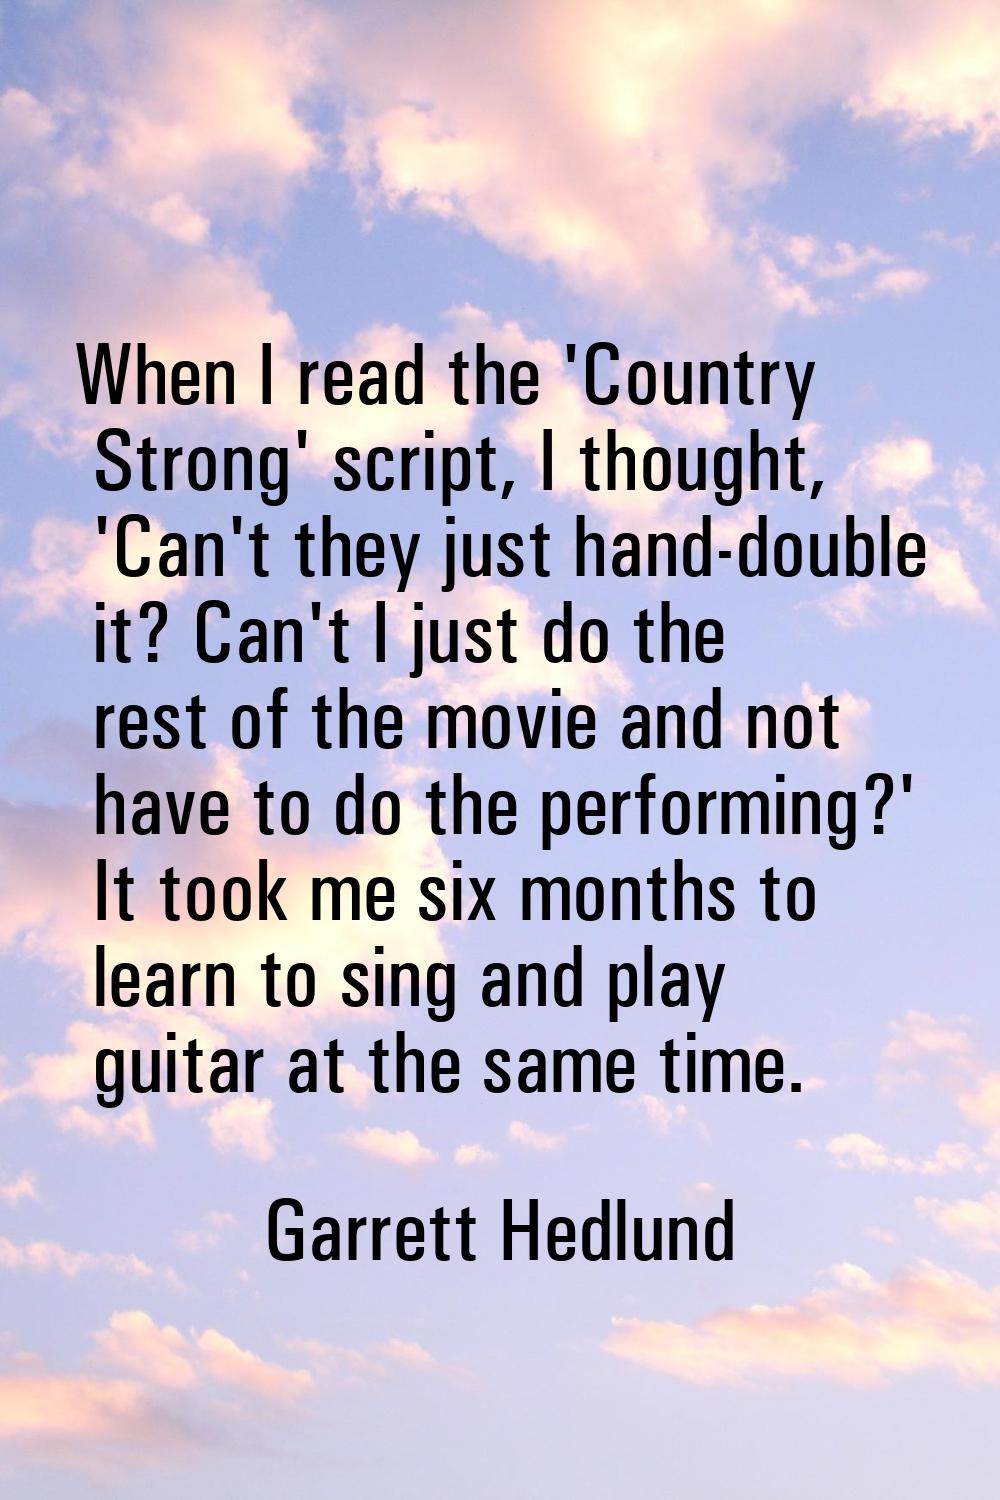 When I read the 'Country Strong' script, I thought, 'Can't they just hand-double it? Can't I just d